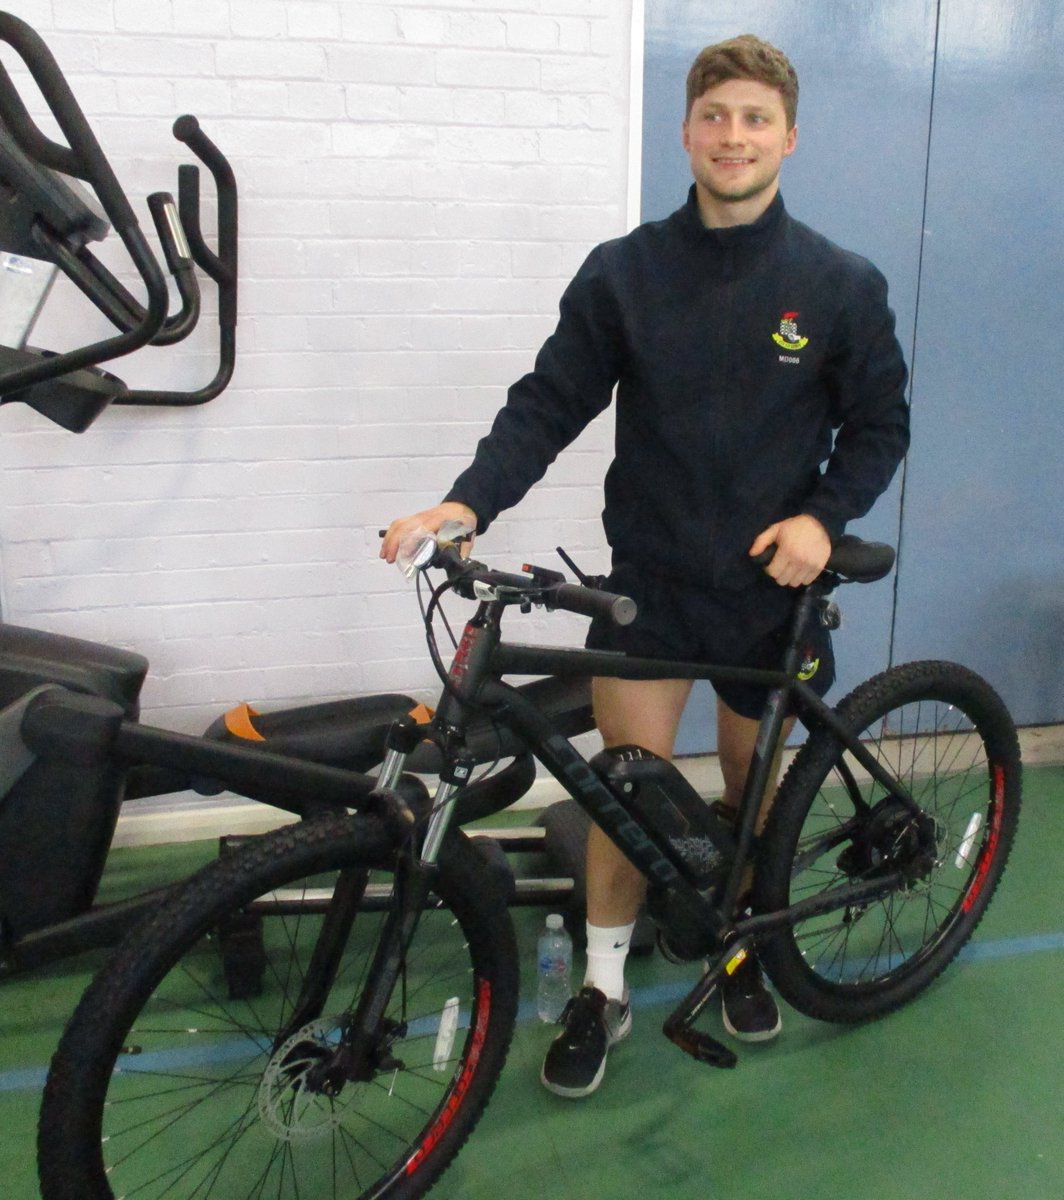 Another first! Our Employment Hub team has worked to source E bikes. This greening initiative will not only help prisoners to get to work but also help to reduce our carbon footprint! Here’s PEI Steadman trying one out!